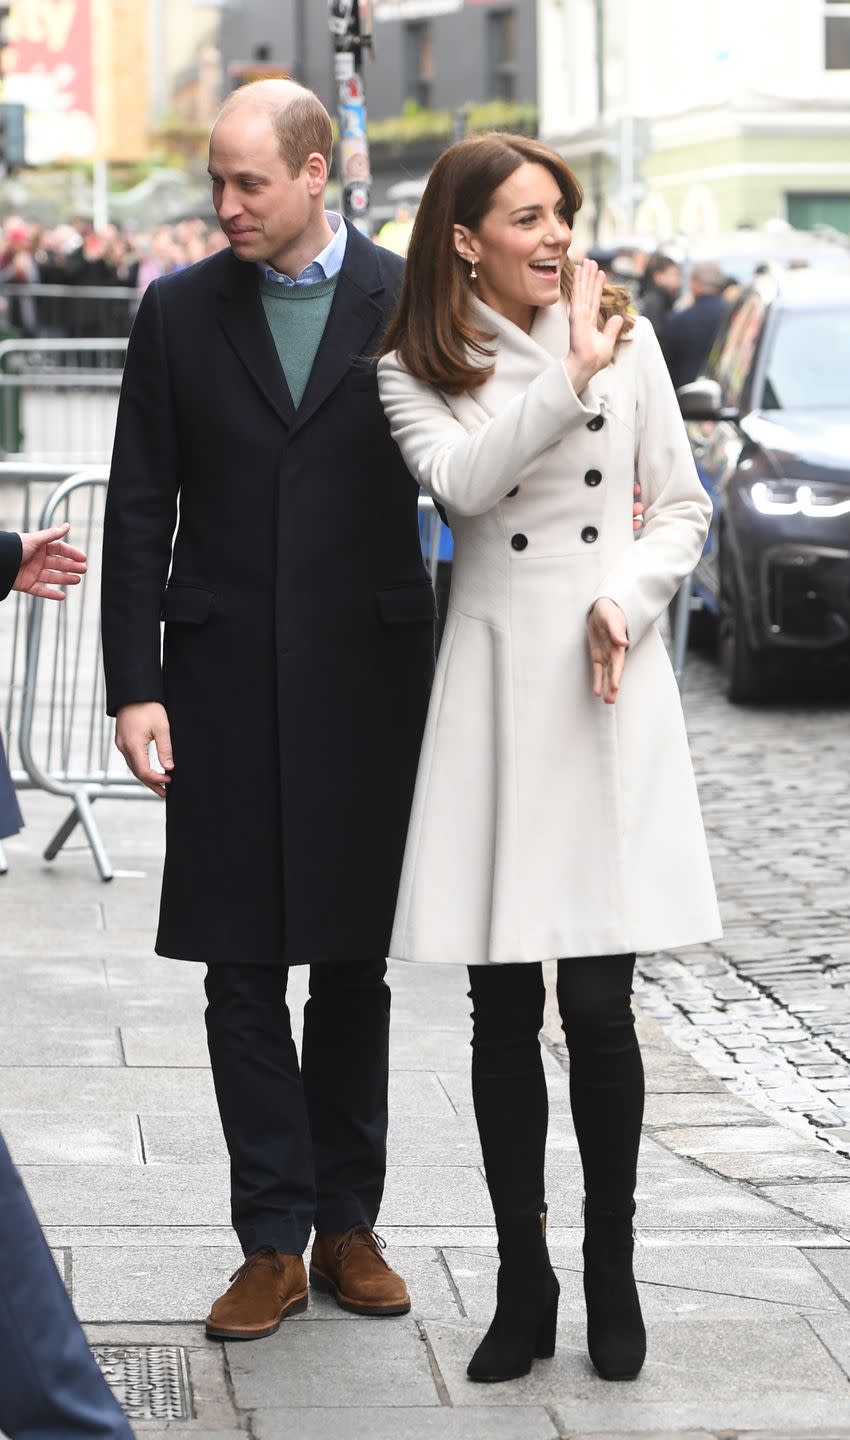 <p>Catherine, Duchess of Cambridge (AKA Kate Middleton) stepped out during the royal tour of Ireland wearing an ivory coat by Reiss that she wore for the first time in 12 years - scroll through to see the then VS. now comparison. While Kate teamed the coat with tights and mid-rise boots for the first outing, the Duchess opted for a pair of black trousers and heeled ankle boots the second time around. </p>